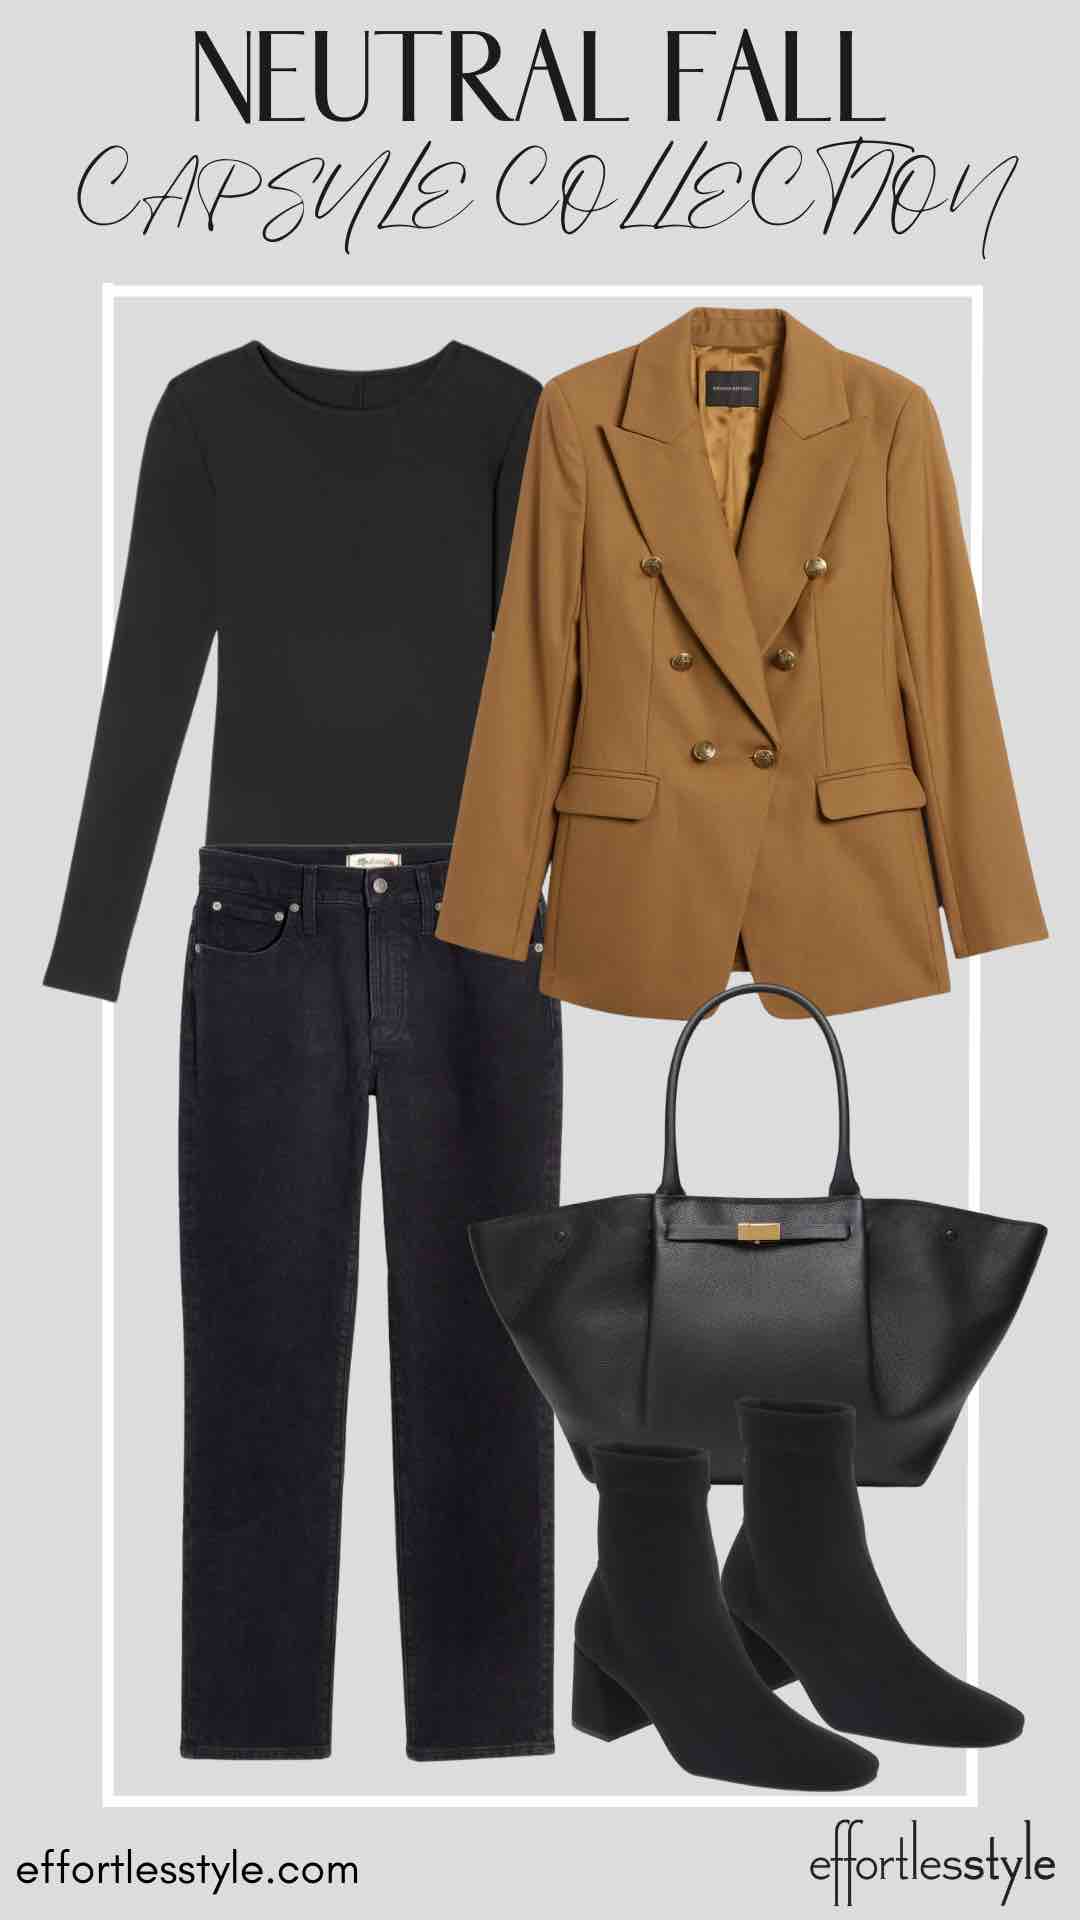 How To Wear Our Neutral Fall Capsule Wardrobe - Part 1 Blazer & Long Sleeve Tee & Black Jeans how to wear black and camel together how to style black and brown together the best black booties for fall water resistant booties how to style sock booties how to style a blazer with black jeans